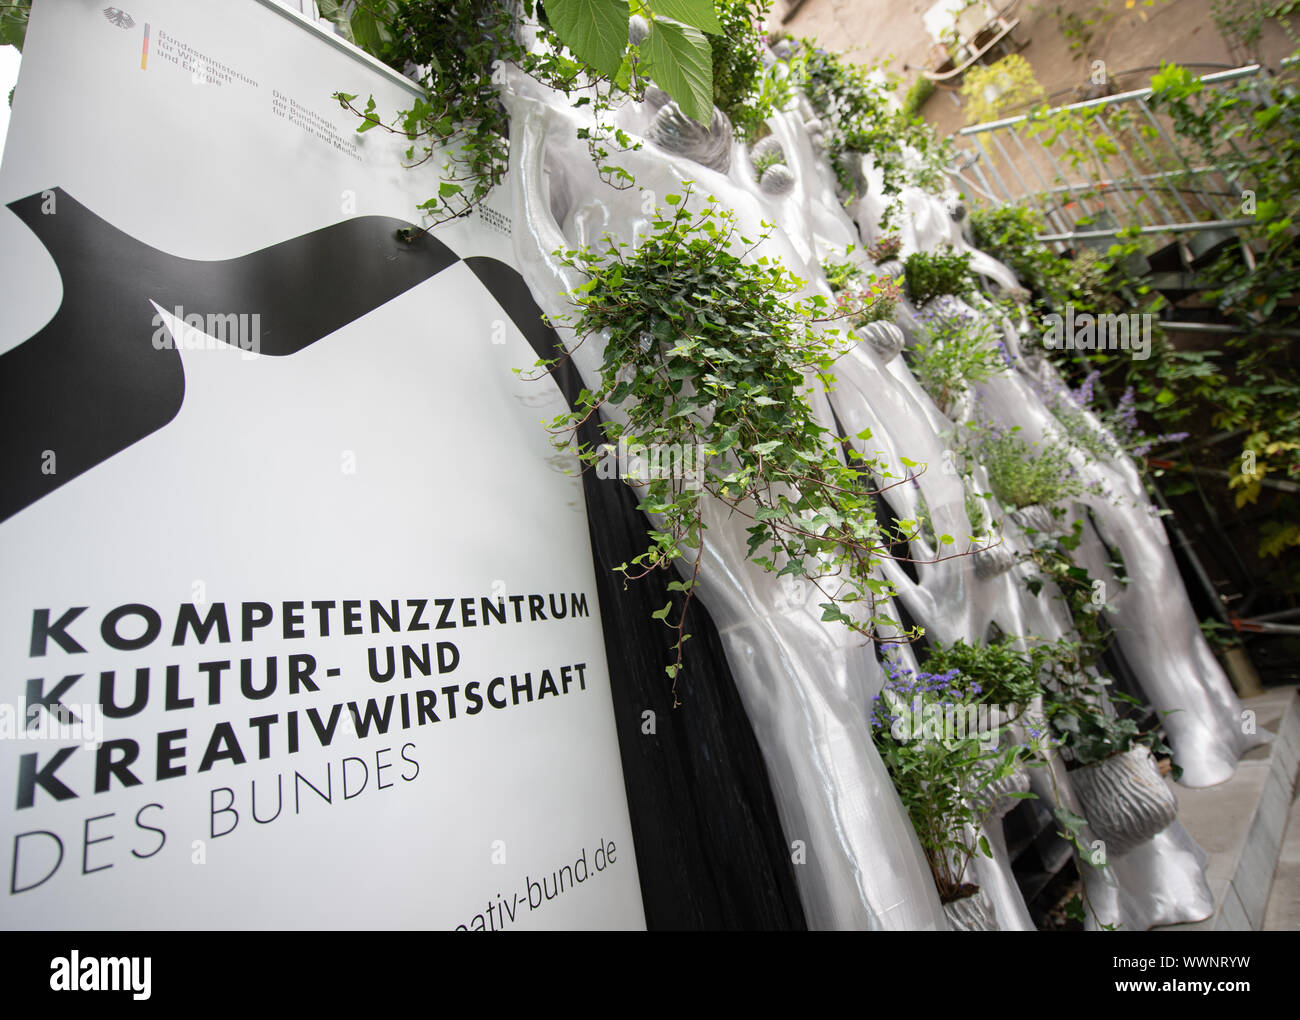 Berlin, Germany. 16th Sep, 2019. A new type of façade cladding was mounted on a wall in the inner courtyard of the Federal Centre of Competence for Culture and Creative Industries. BigRep, leading manufacturer of 3D printers, presented the world's first fully 3D printed environmental habitat for green plants and insects. It was made entirely from recycled plastic materials from PET bottles. Credit: Tom Weller/dpa/Alamy Live News Stock Photo